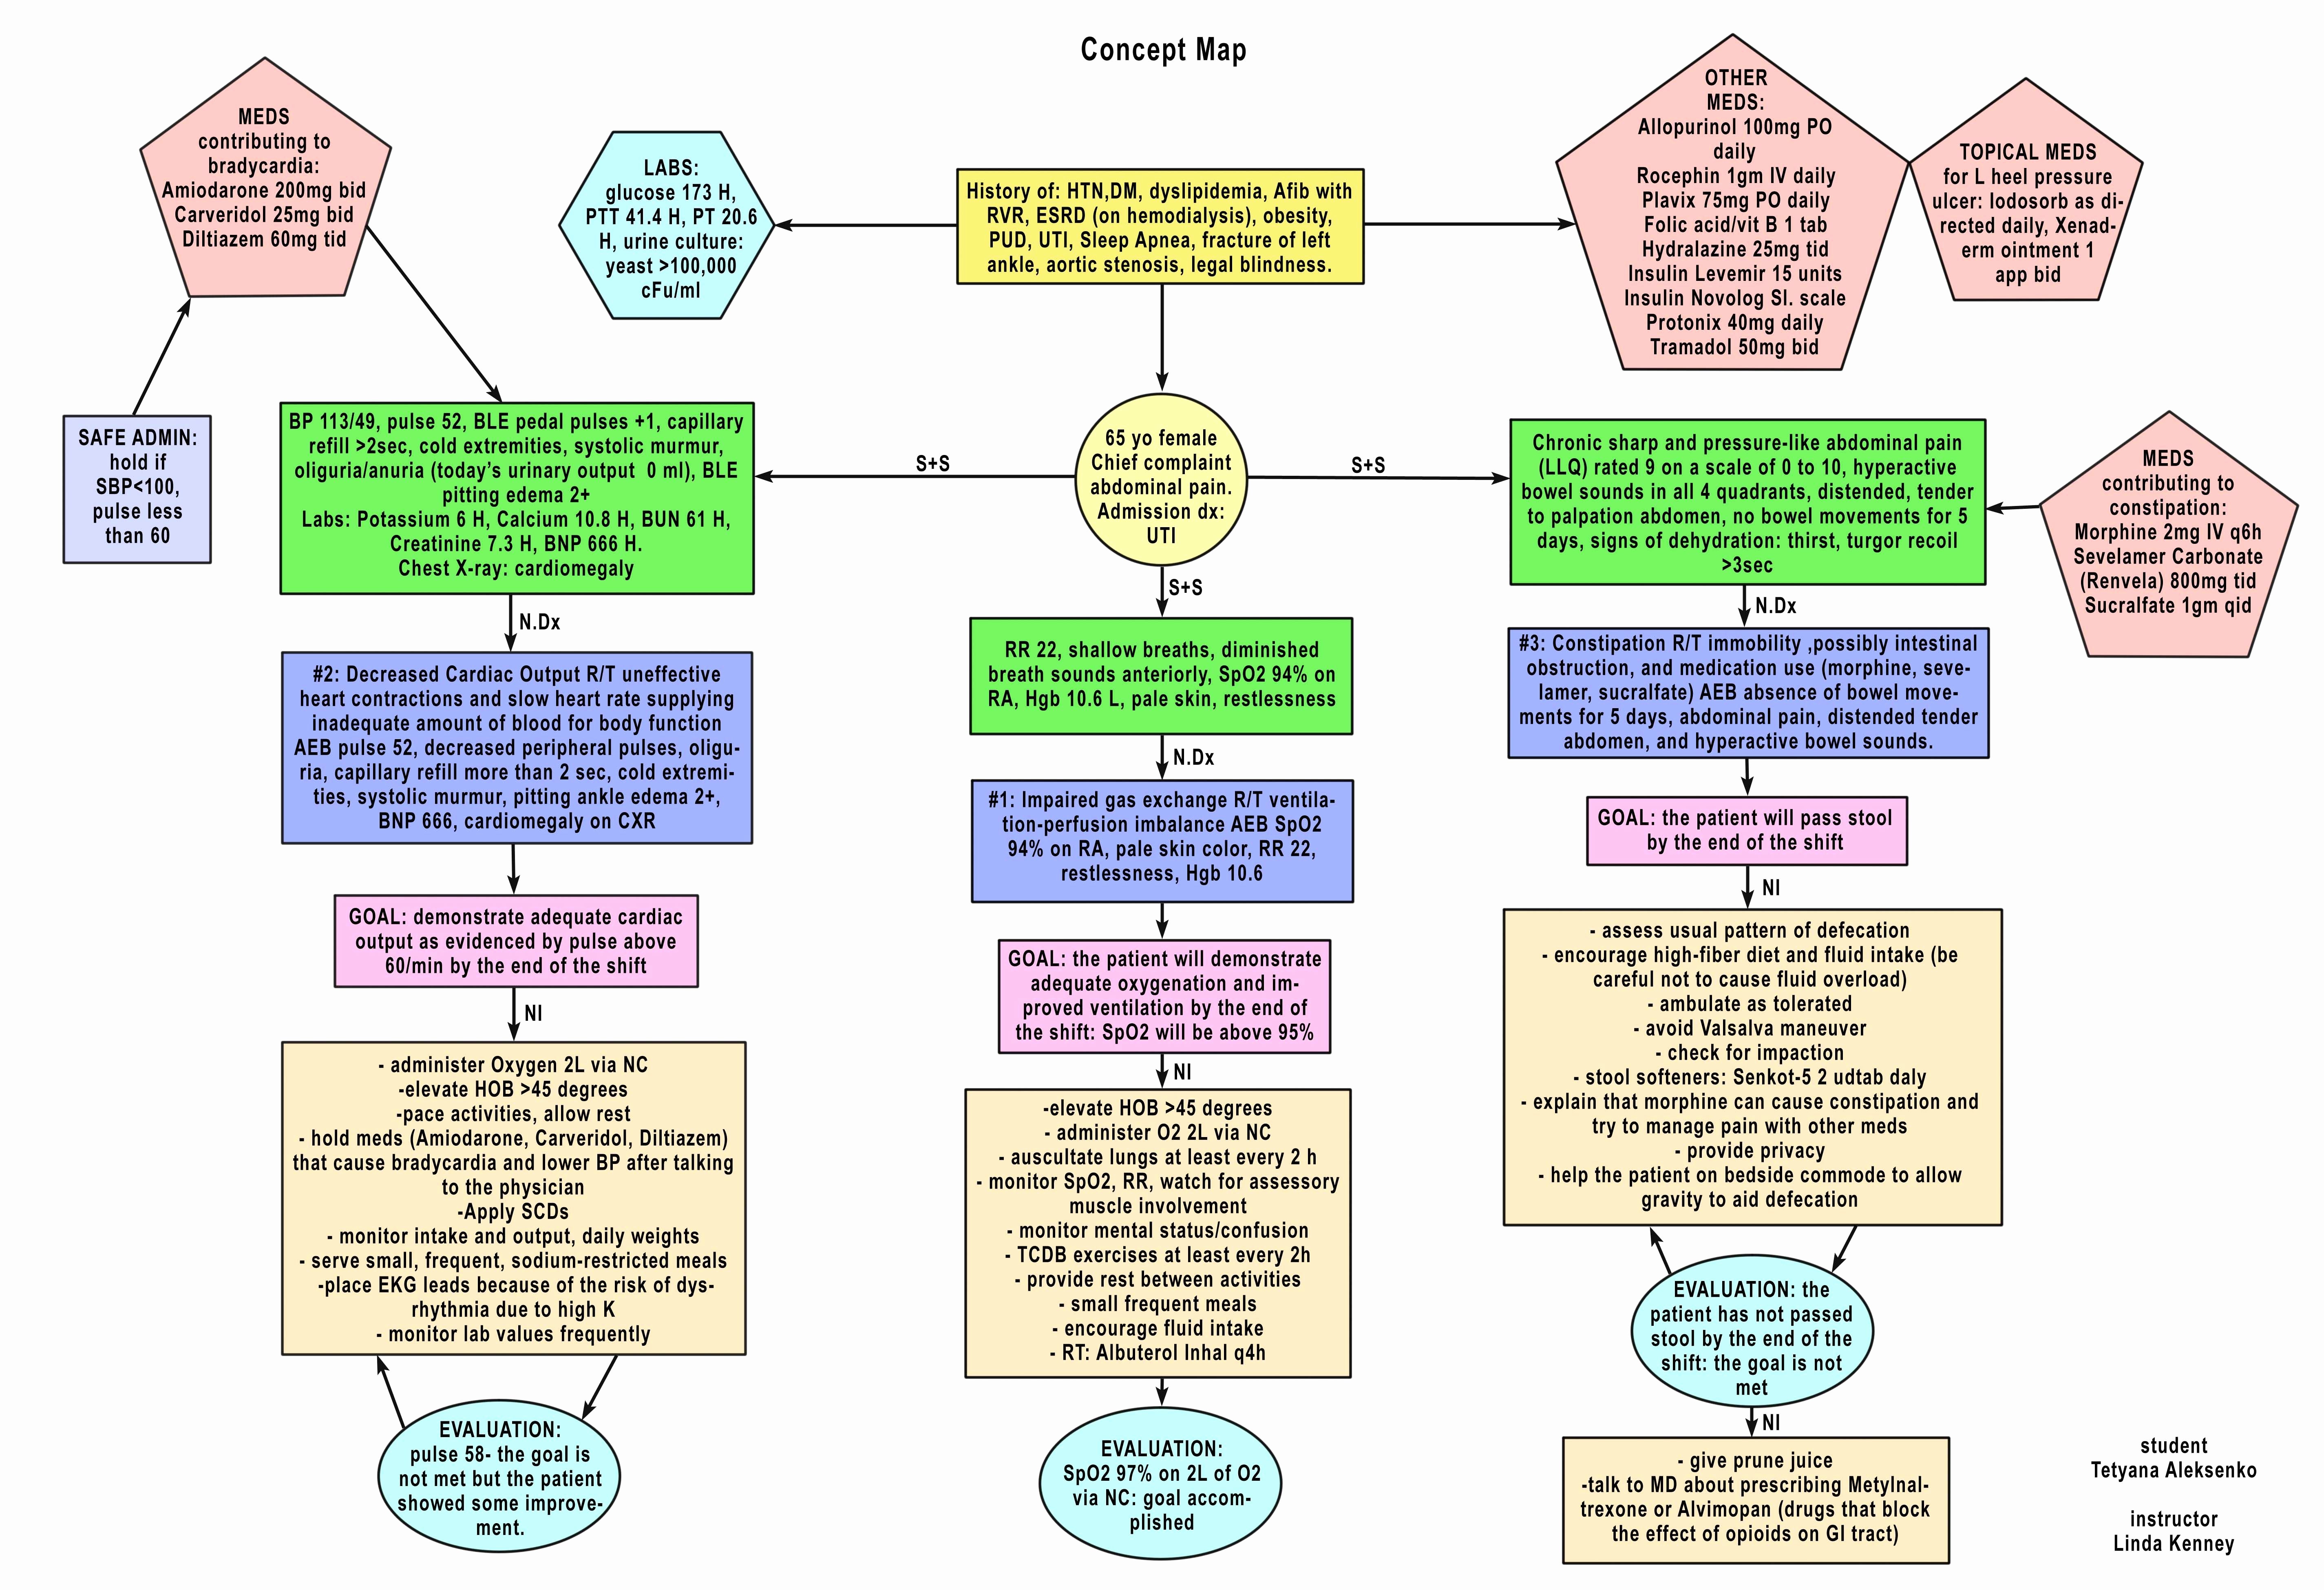 Nursing Concept Mapping Template Luxury Nursing Concept Map with Key Google Search